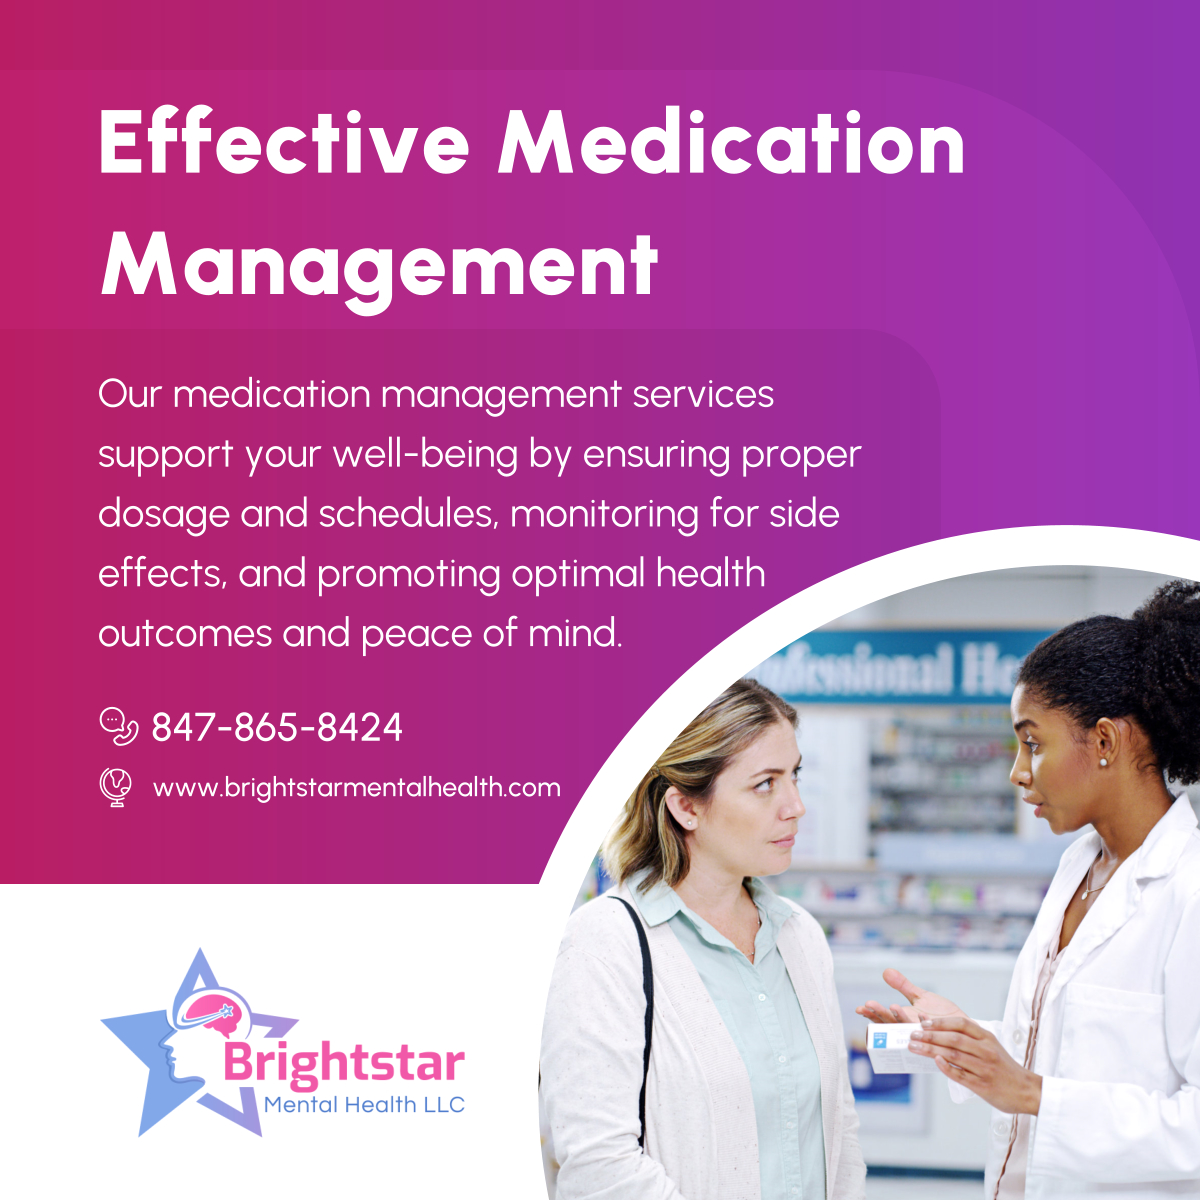 Discover how our medication management services streamline your treatment, helping you stay on track toward better mental health. Contact us today! 

#IllinoisTherapist #ChicagoTherapy #MedicationManagement